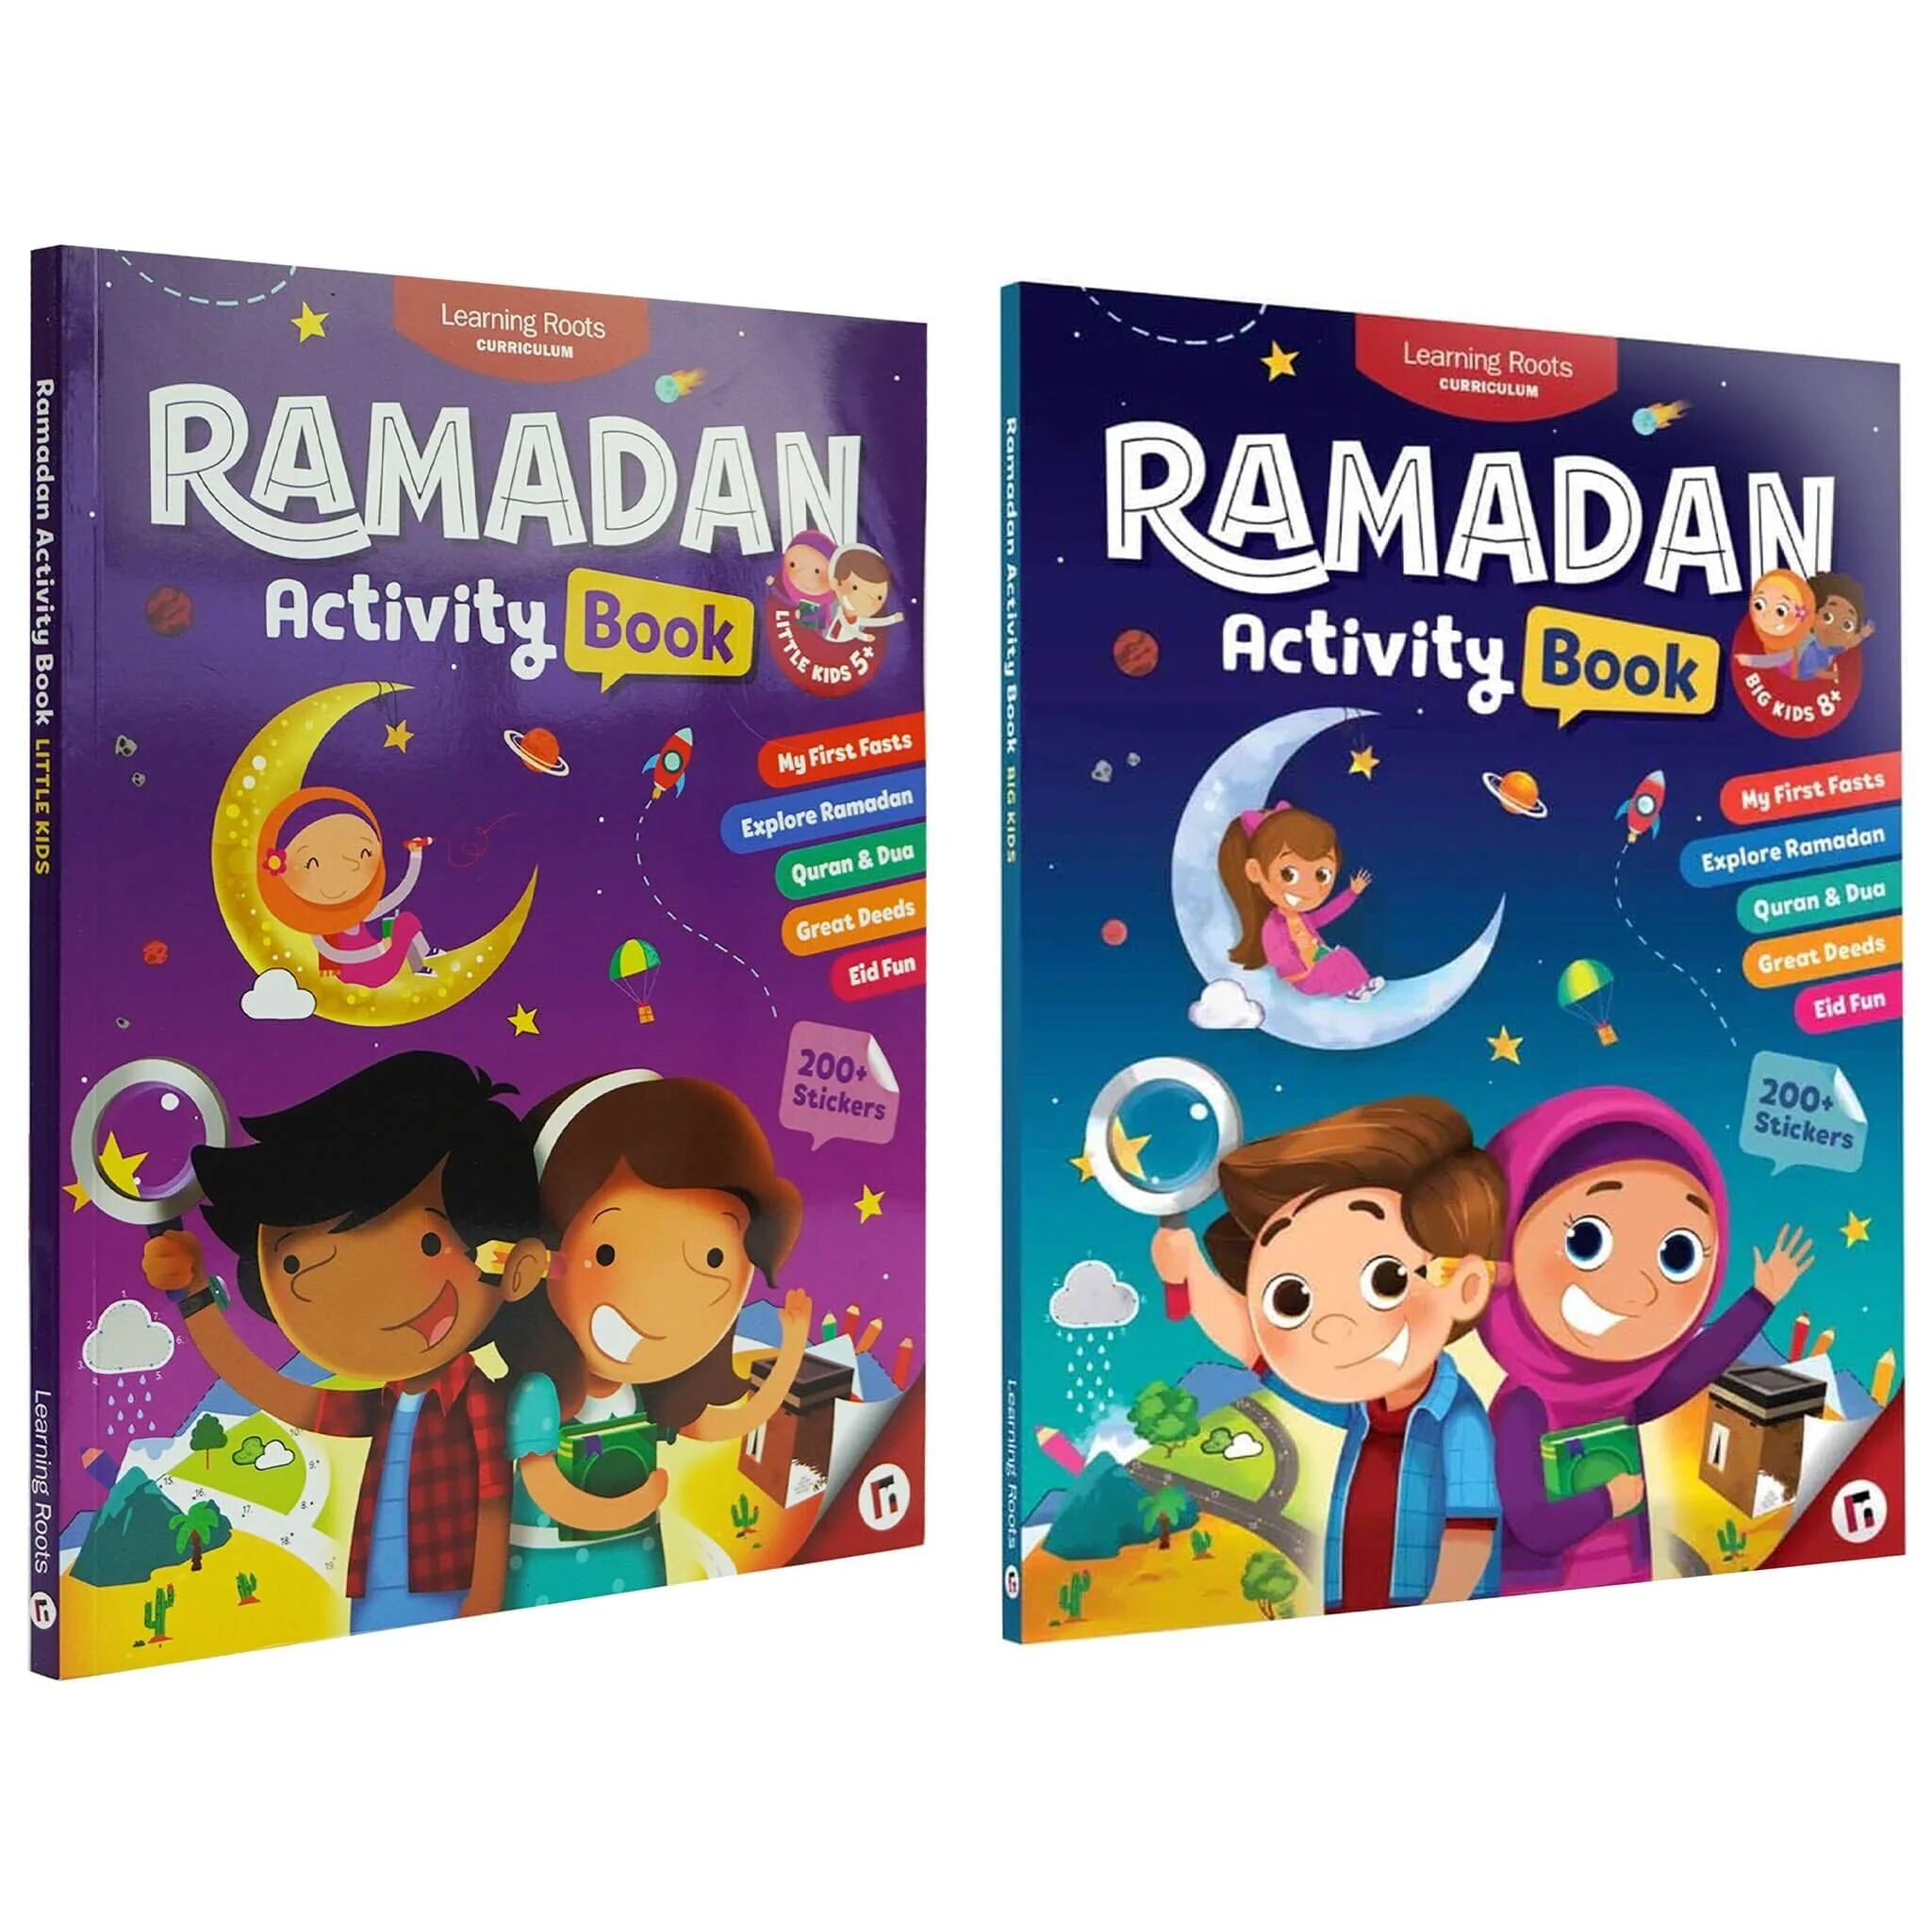 Ramadan Activity Book for Little Kids & Big Kids by Zaheer Khatri 2 Books Collection Set - Ages 5-10 - Paperback Learning Roots